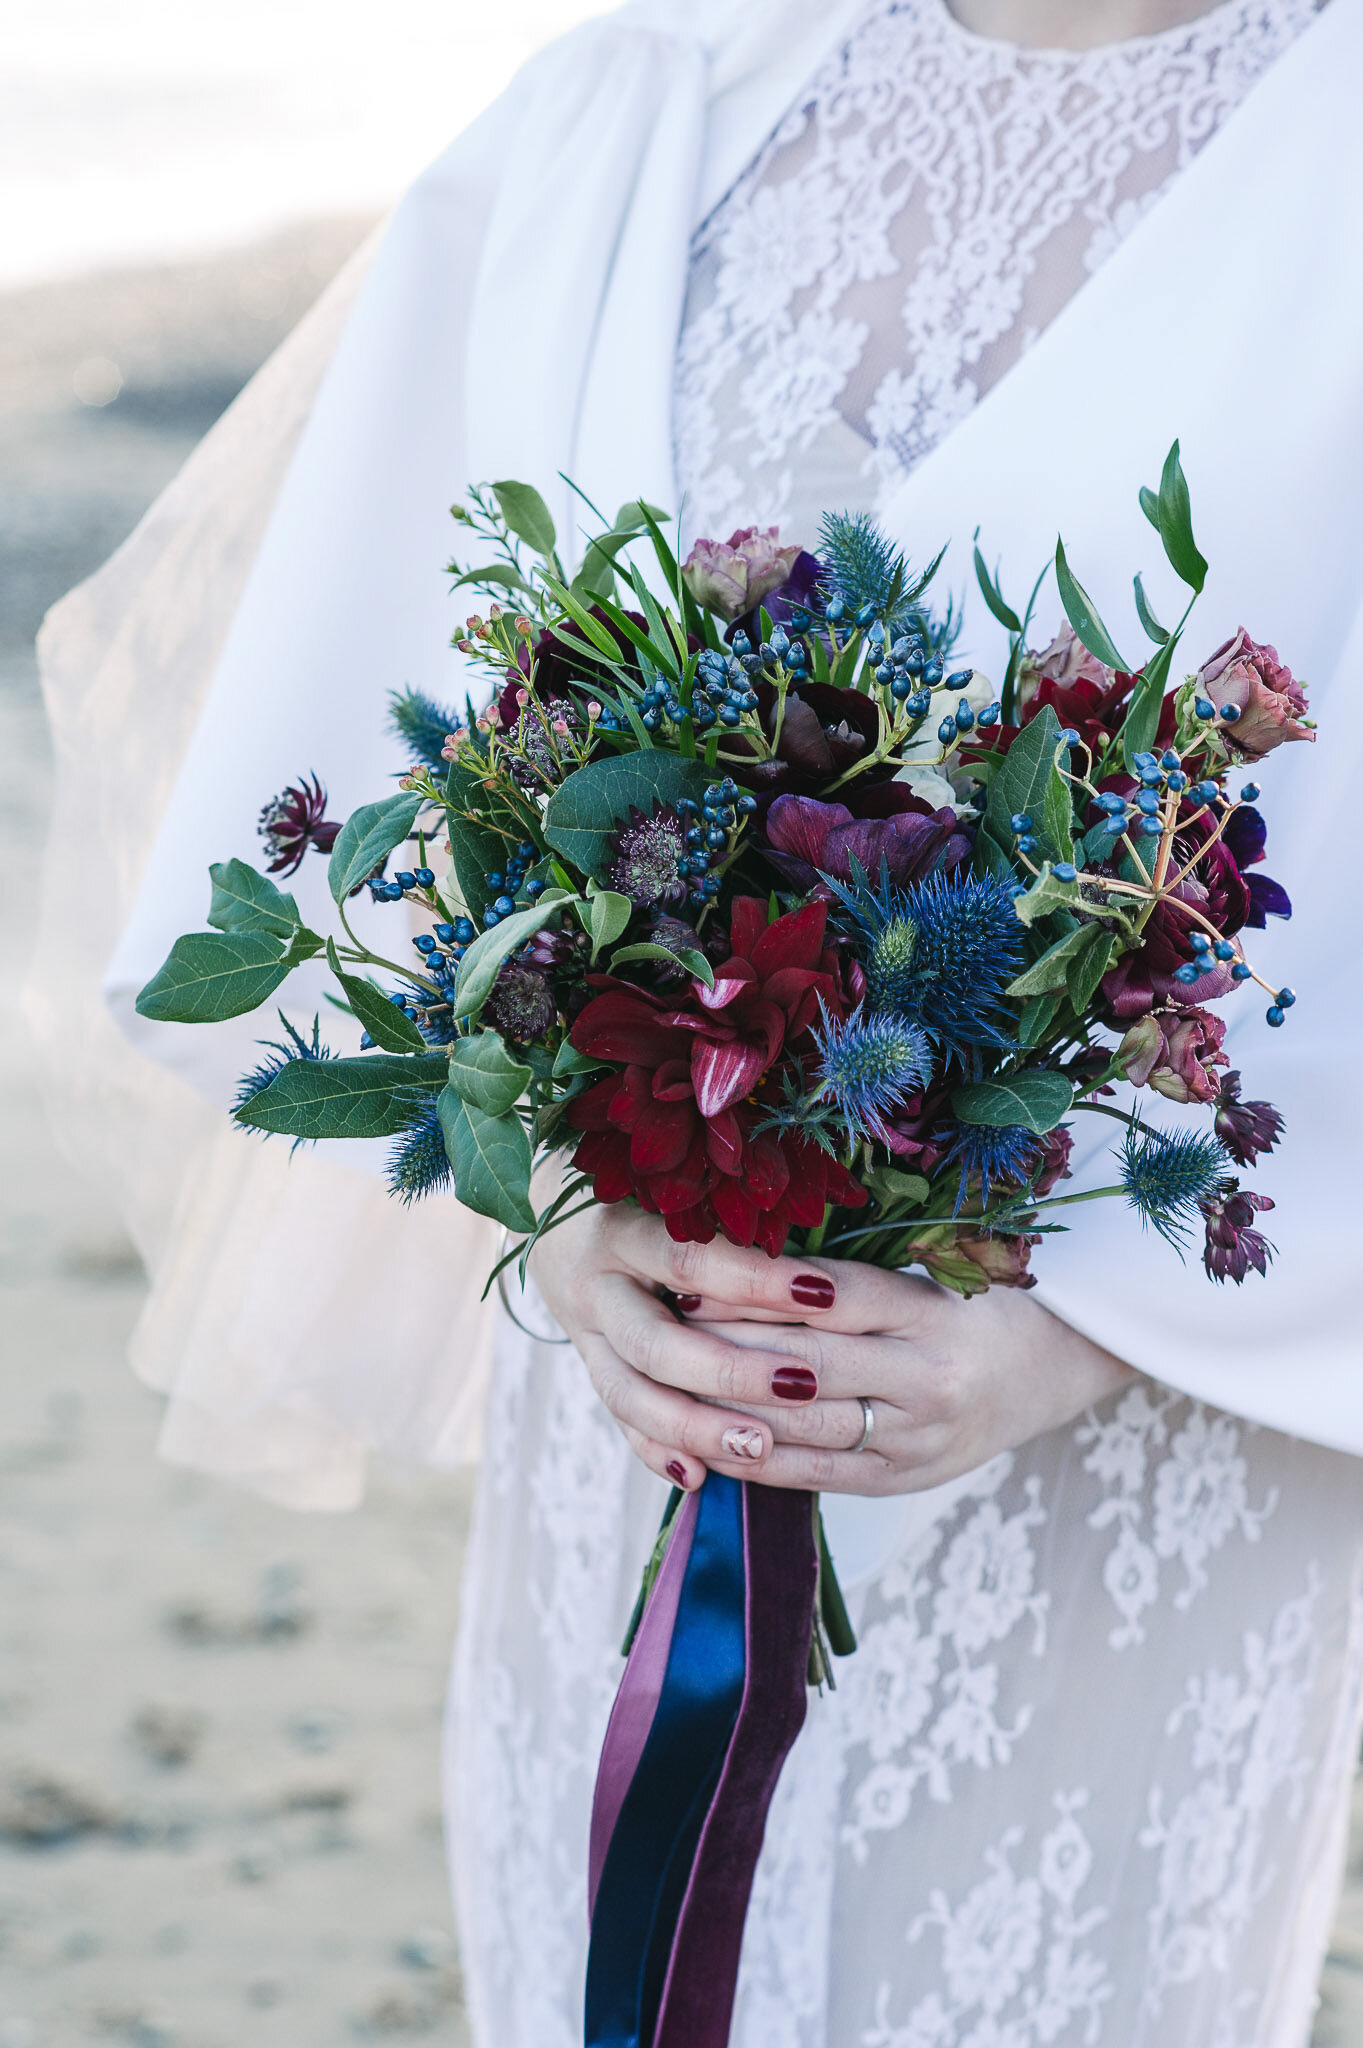 Wedding bouquet with red and blue flowers from local Irish wedding vendor.